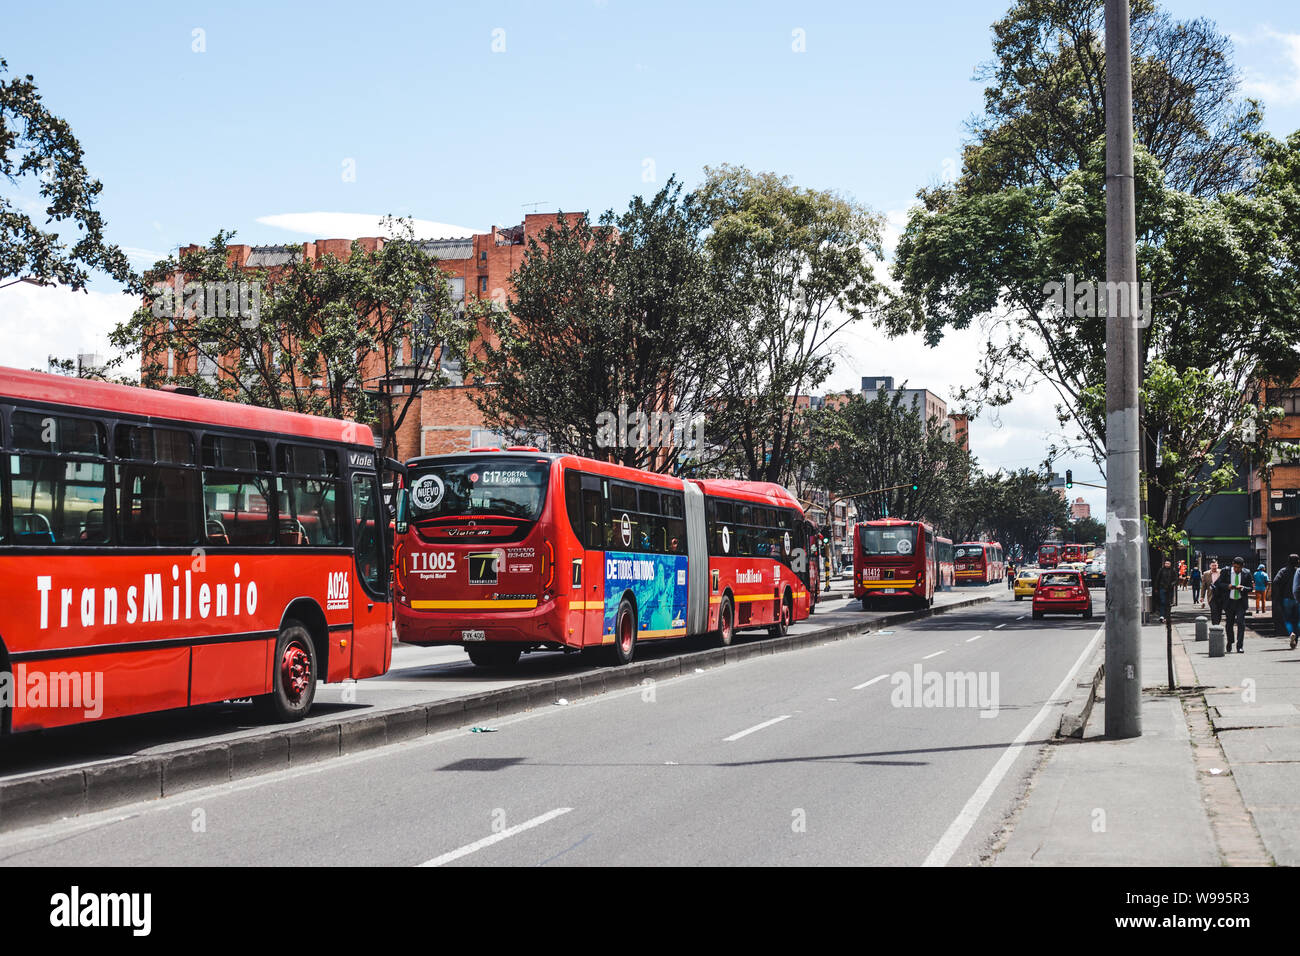 The red Transmilenio public bus system in the bus lane through the center of Bogotá, Colombia's capital city Stock Photo